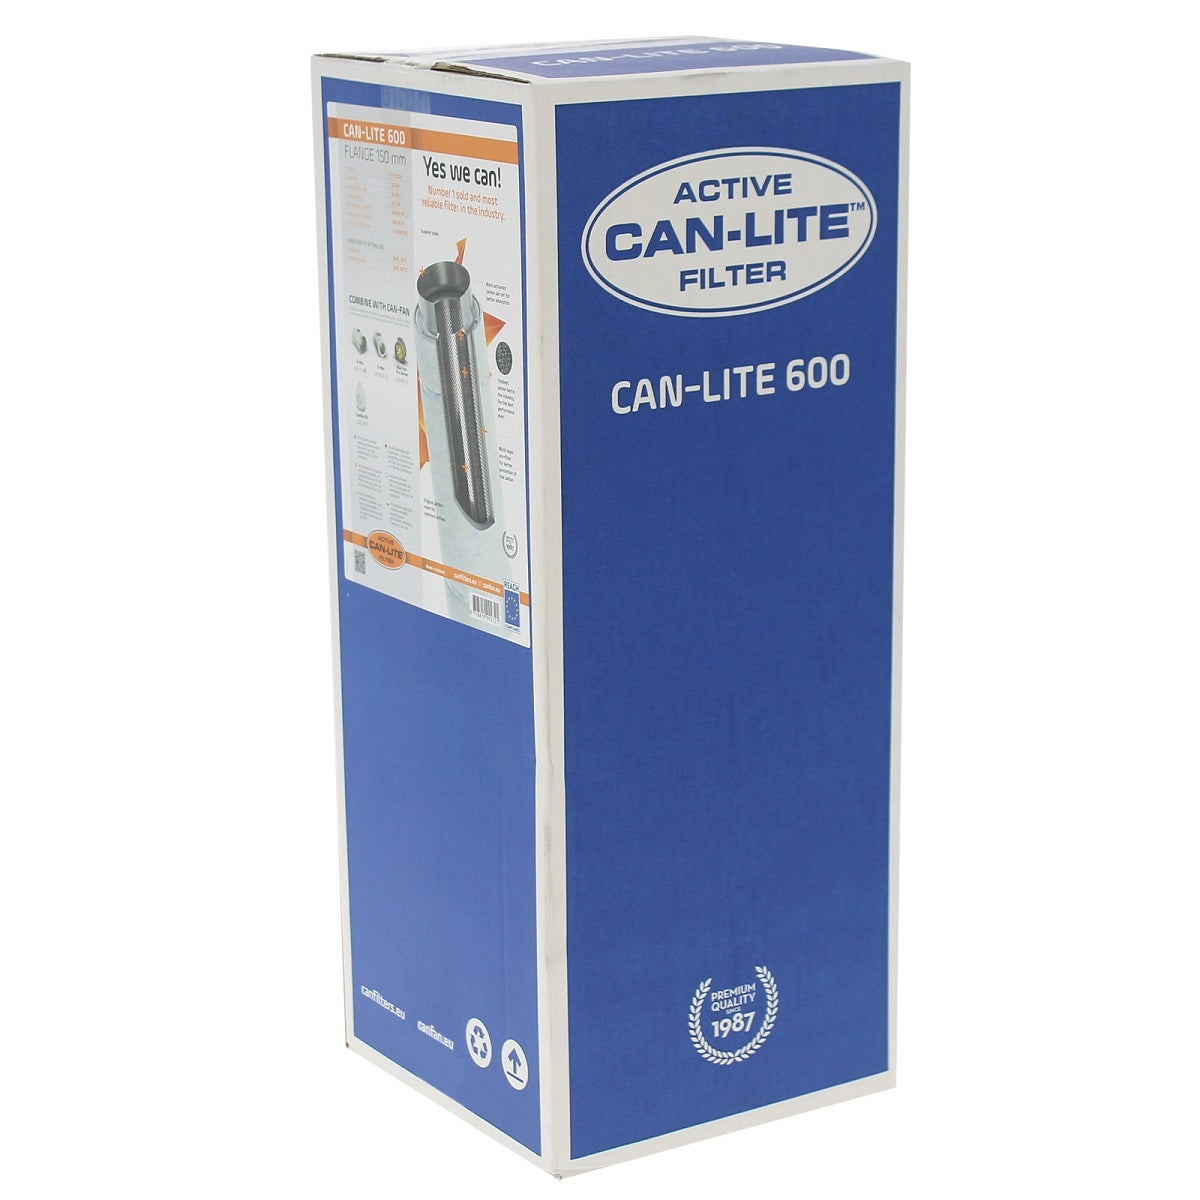 Can-Lite 600 - 150mm (600-660m3/h)